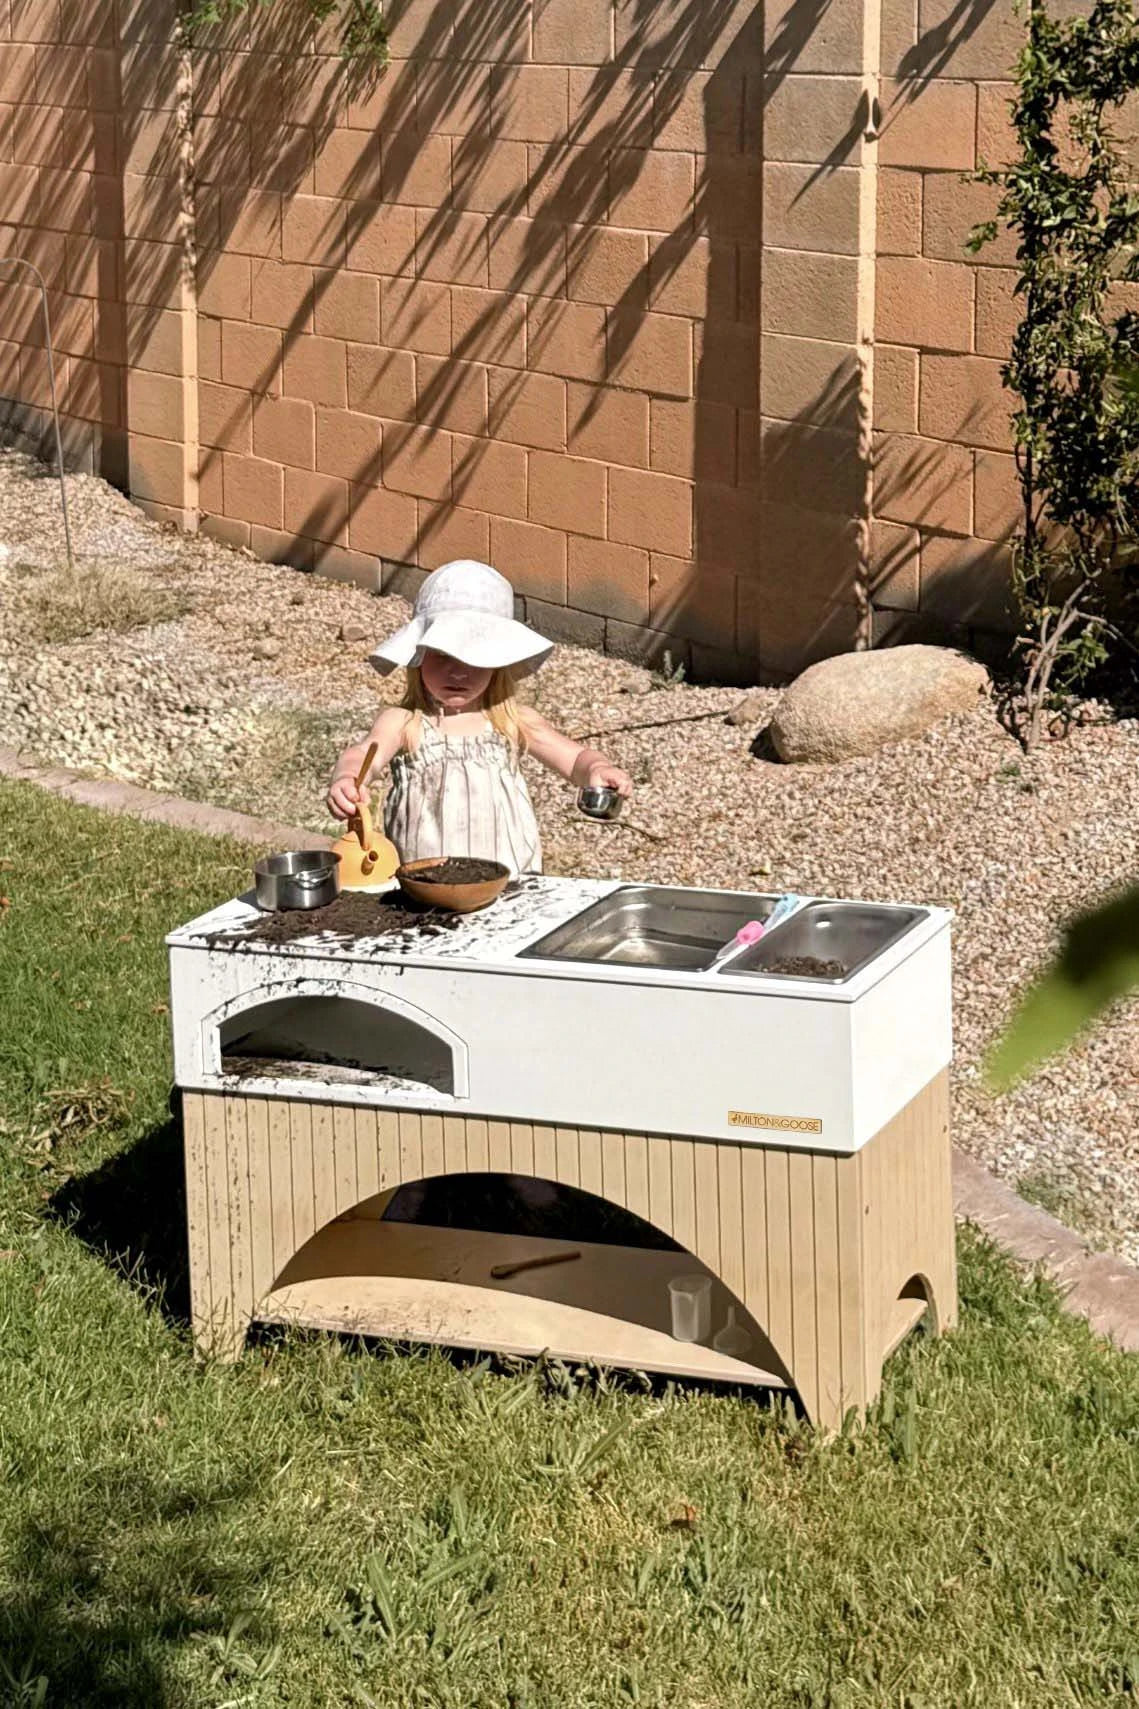 Girl plays at mud kitchen in yard. One sink basin is filled with water and the other has dirt. There is water and mud all over the countertop and dripping down the sides.